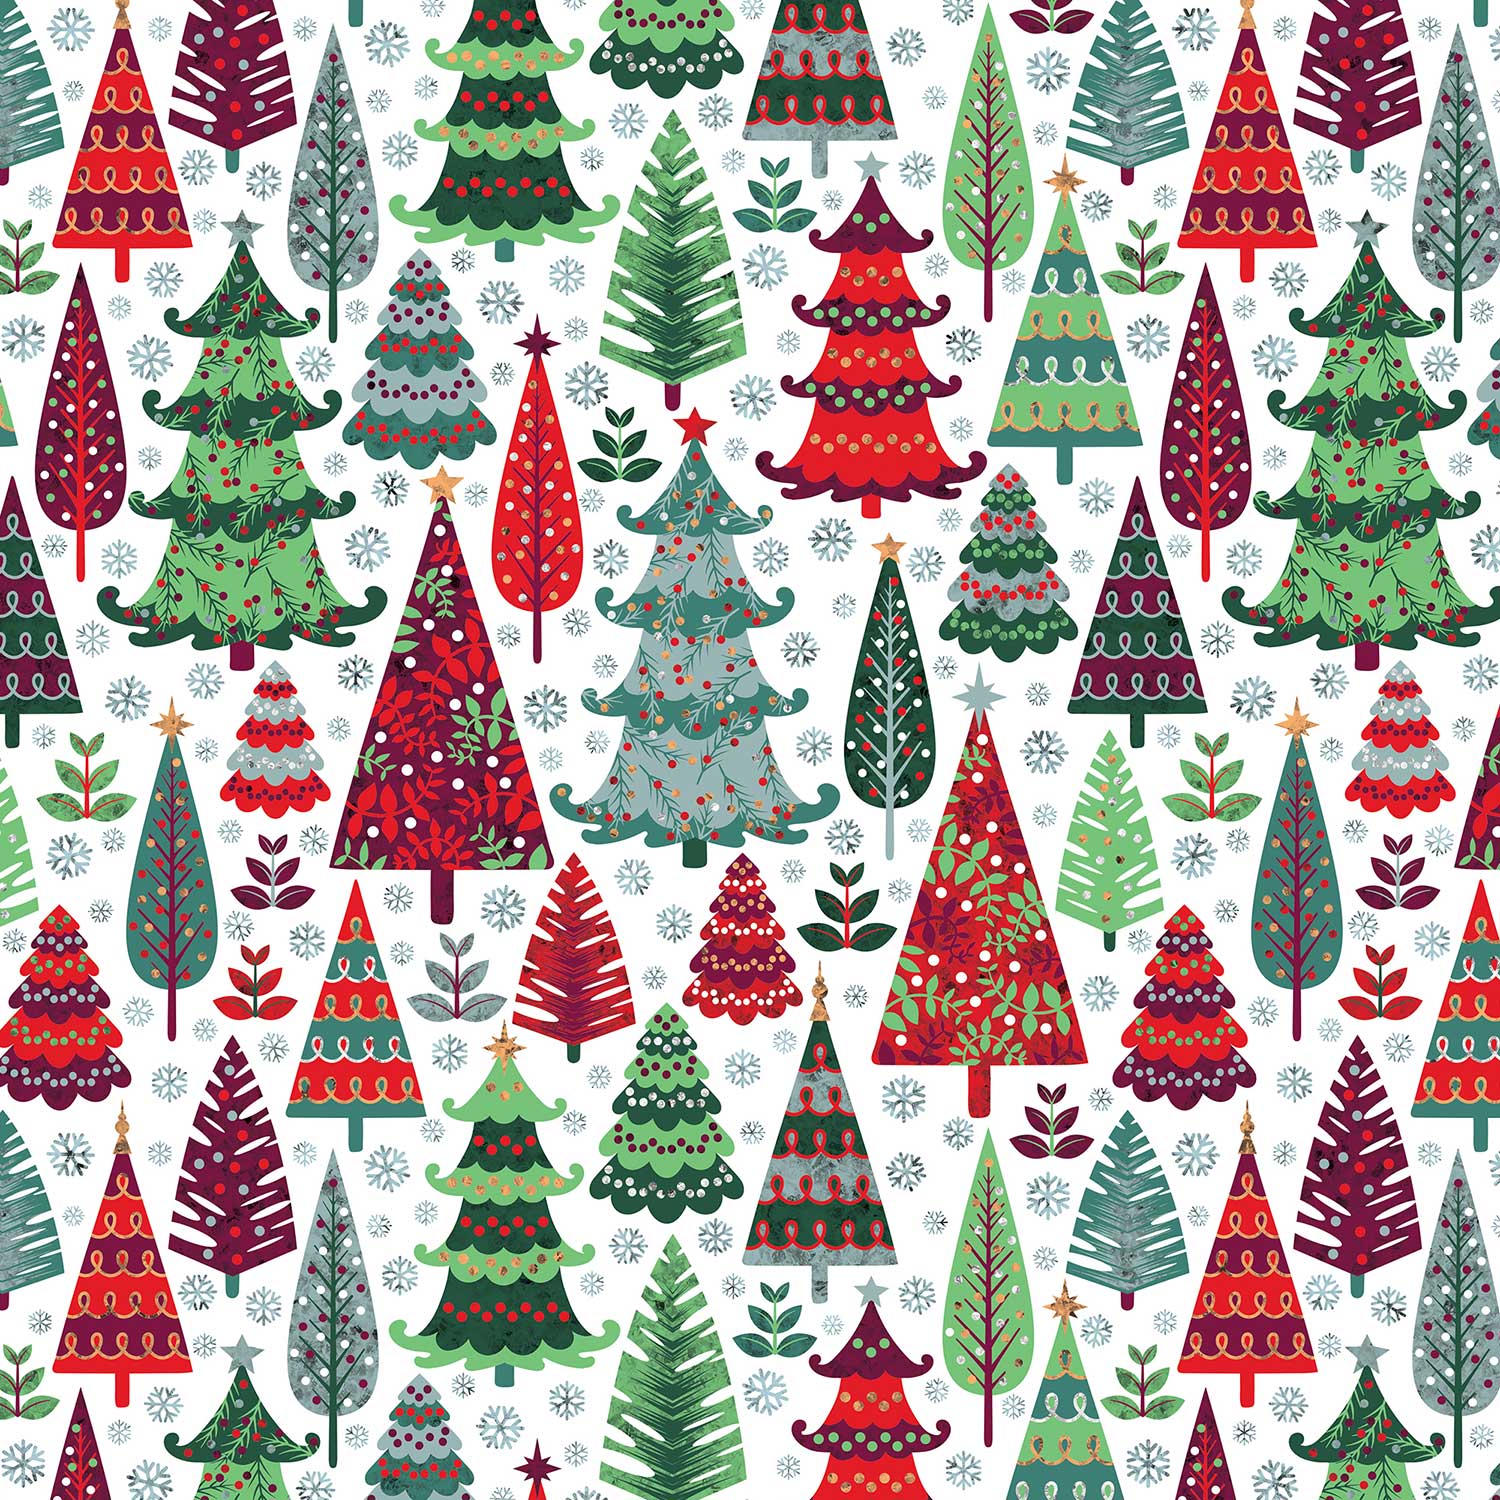 Holographic Trees Christmas Gift Wrap Full Ream 833 ft x 30 in